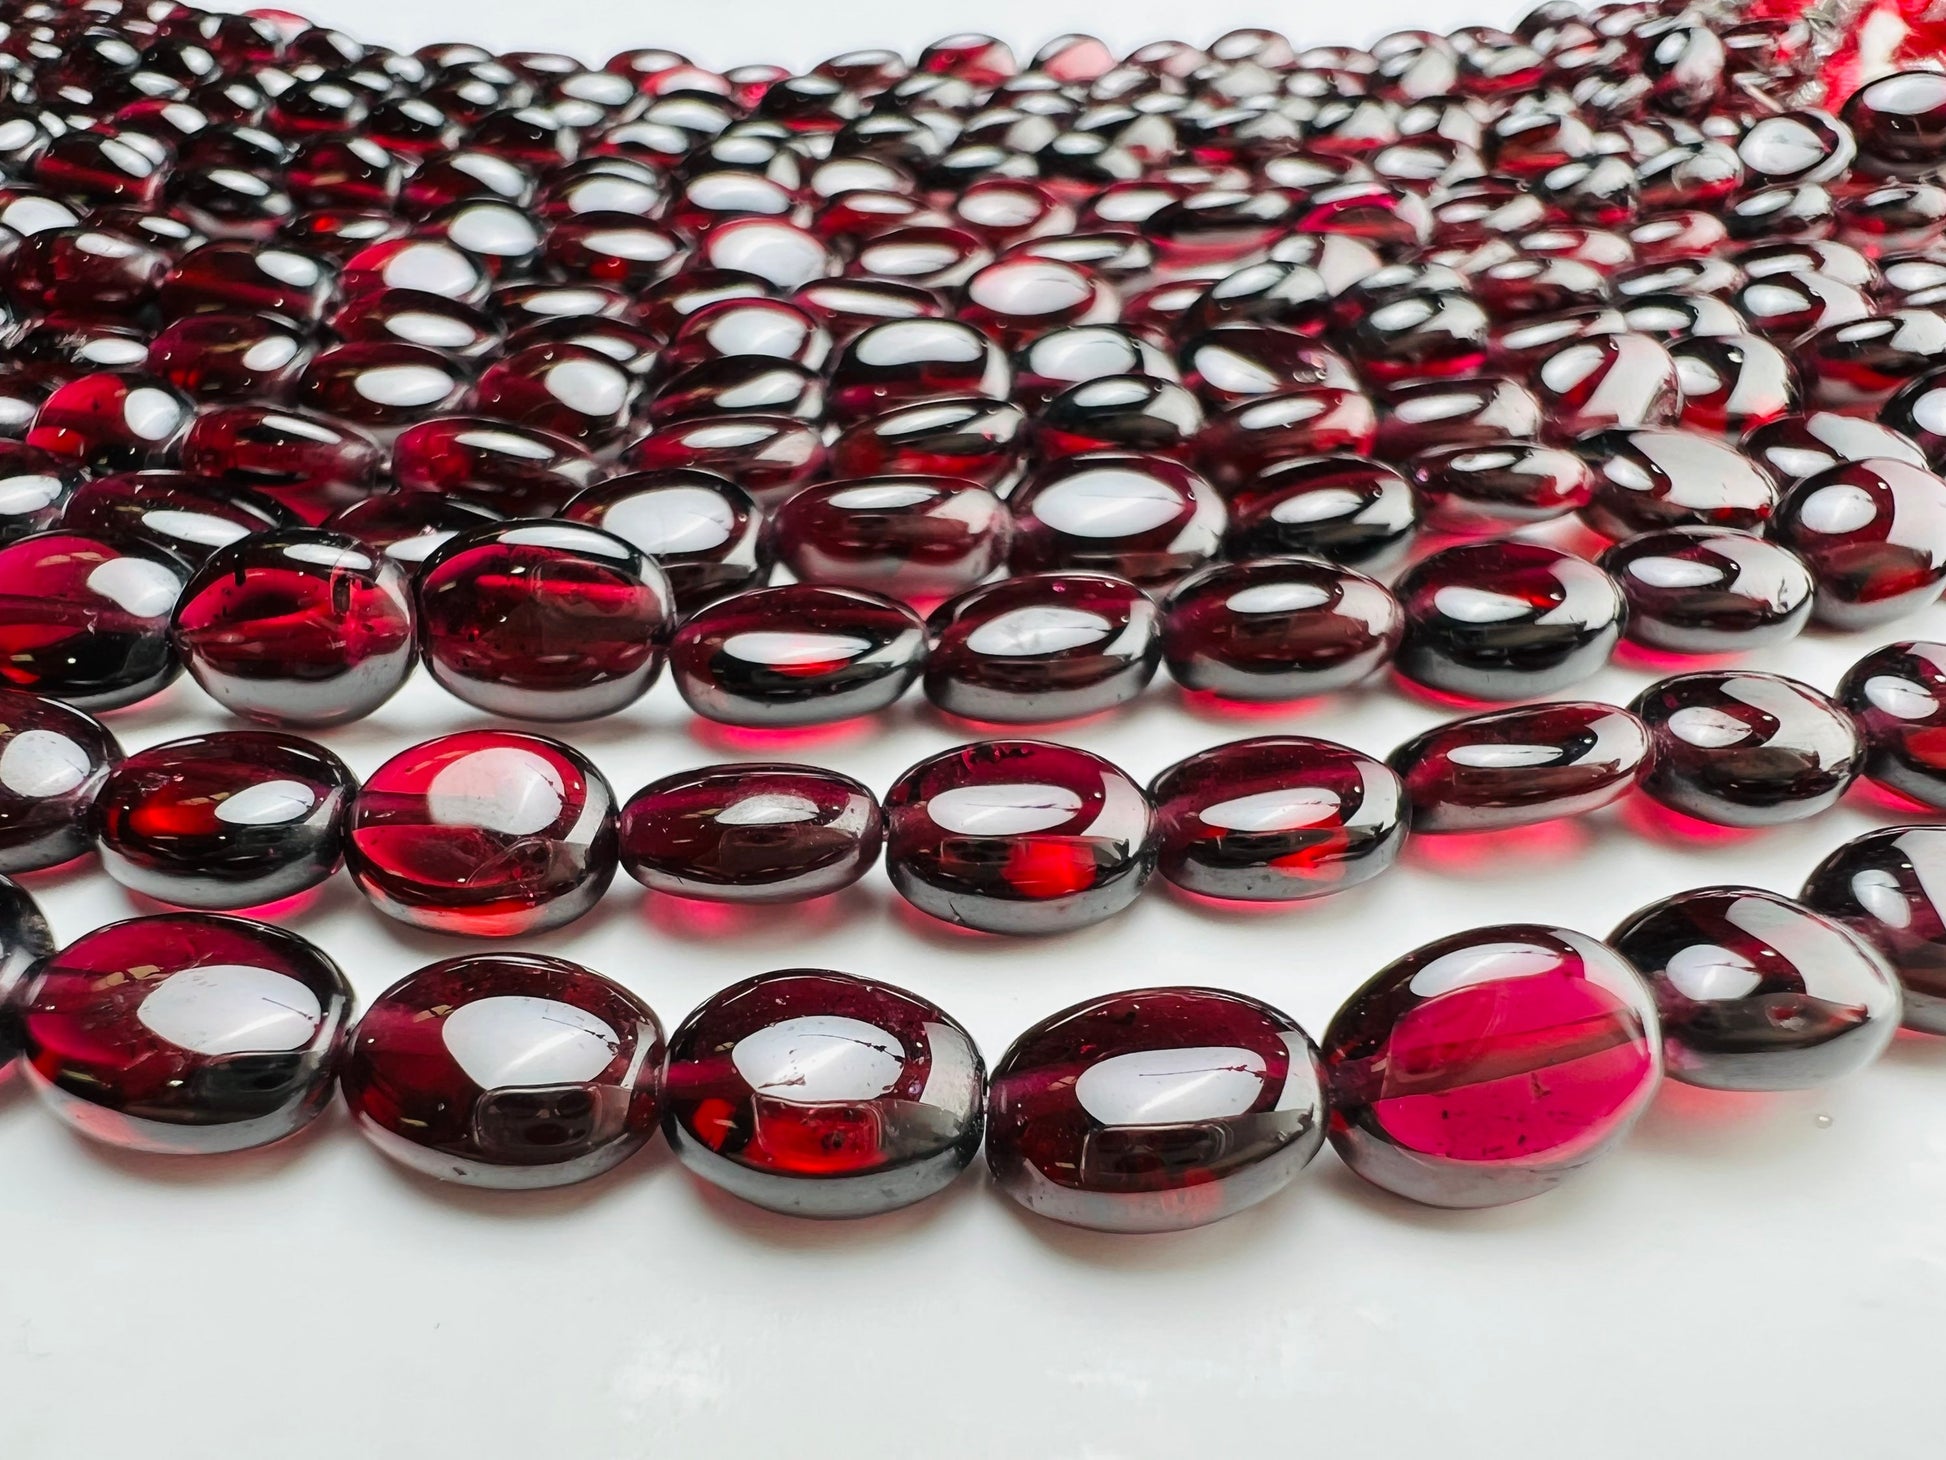 Mozambique Garnet AAA Smooth Oval 7x8-9mm Jewelry Making, Rich Merlot Natural Gemstone beads 8.5” strand . Single or bulk